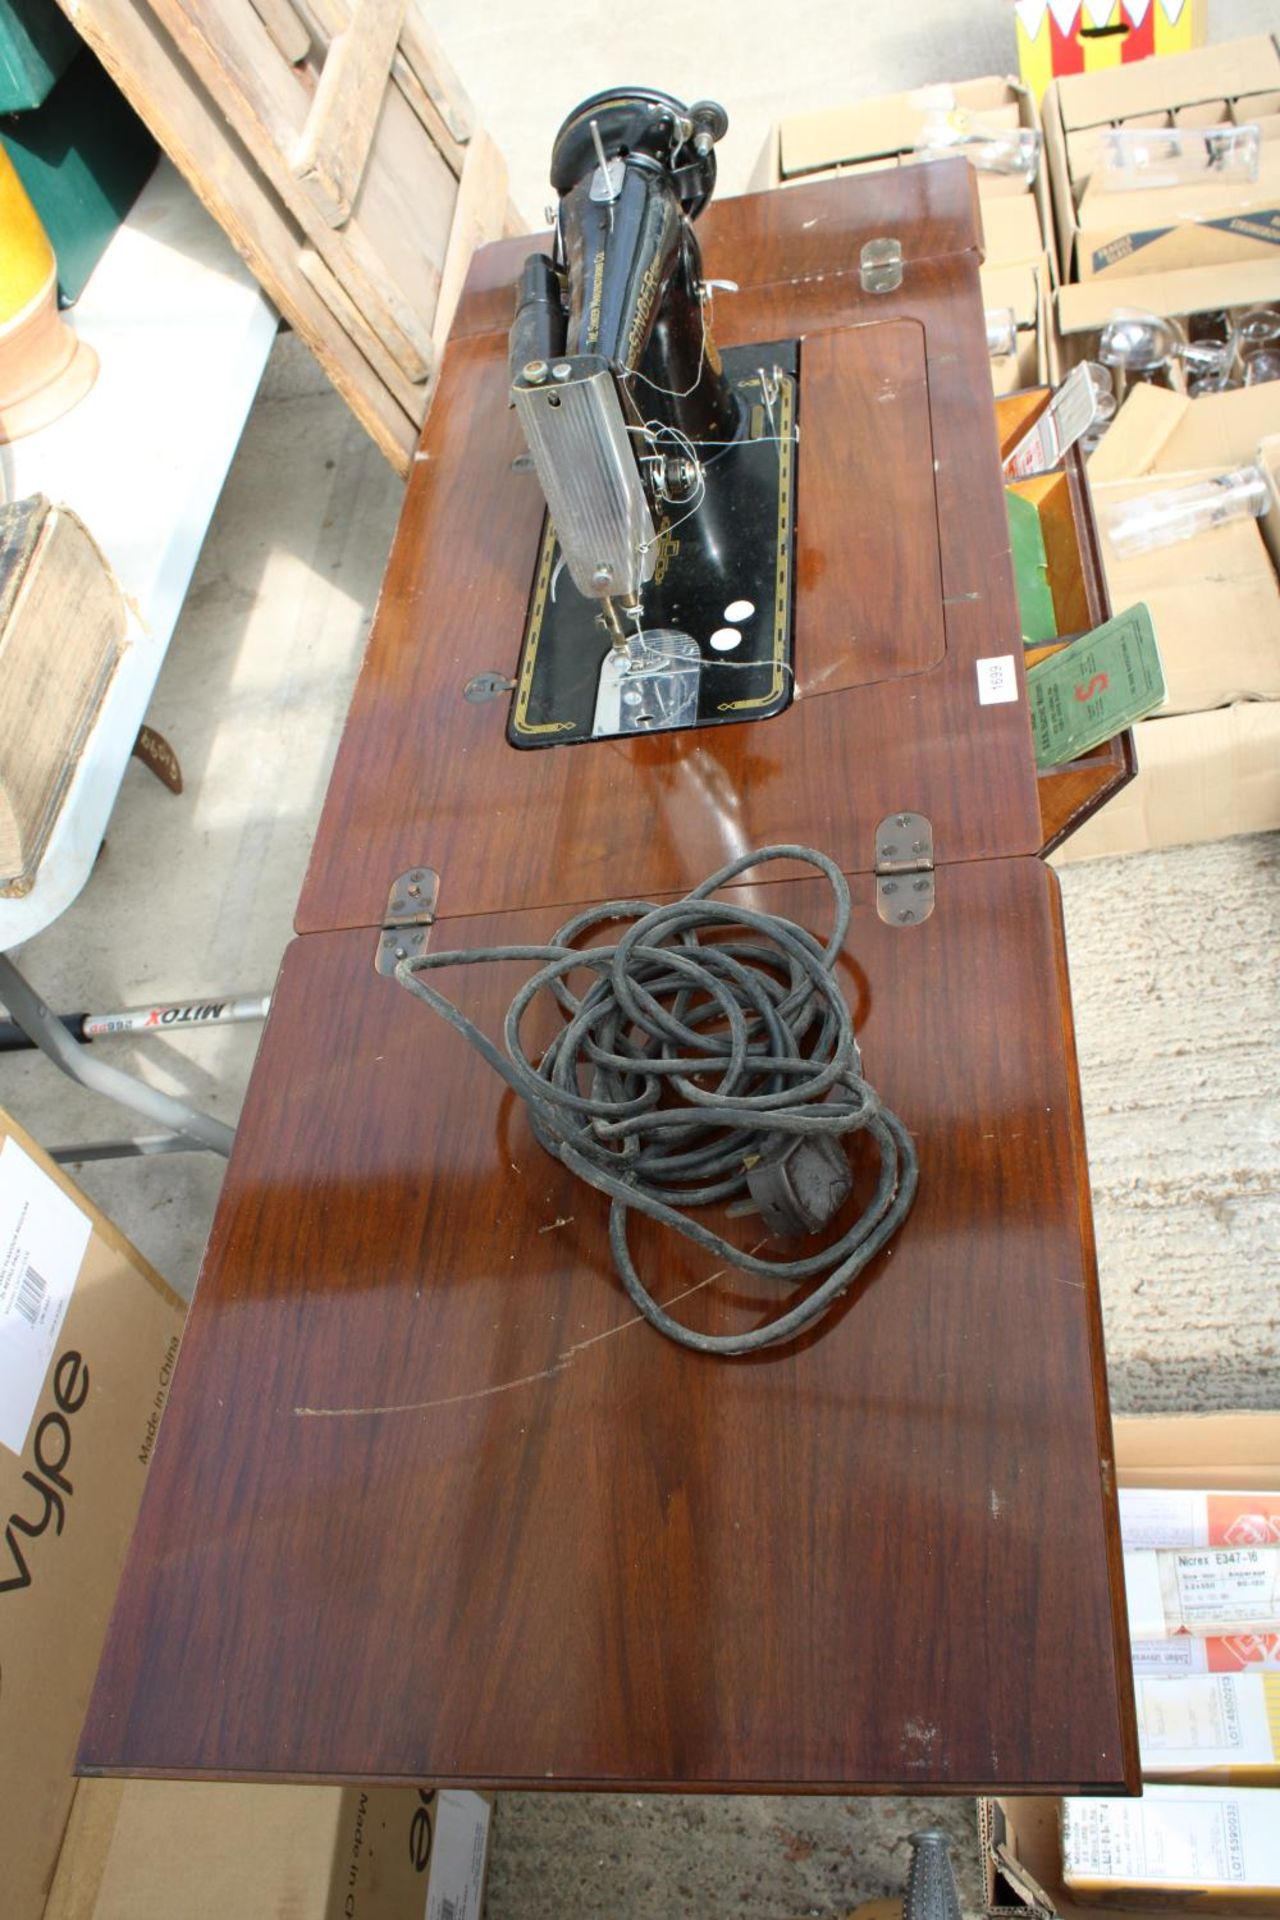 A VINTAGE SEWING TABLE WITH SINGER SEWING MACHINE BELIEVED IN WORKING ORDER BUT NO WARRANTY - Image 4 of 5